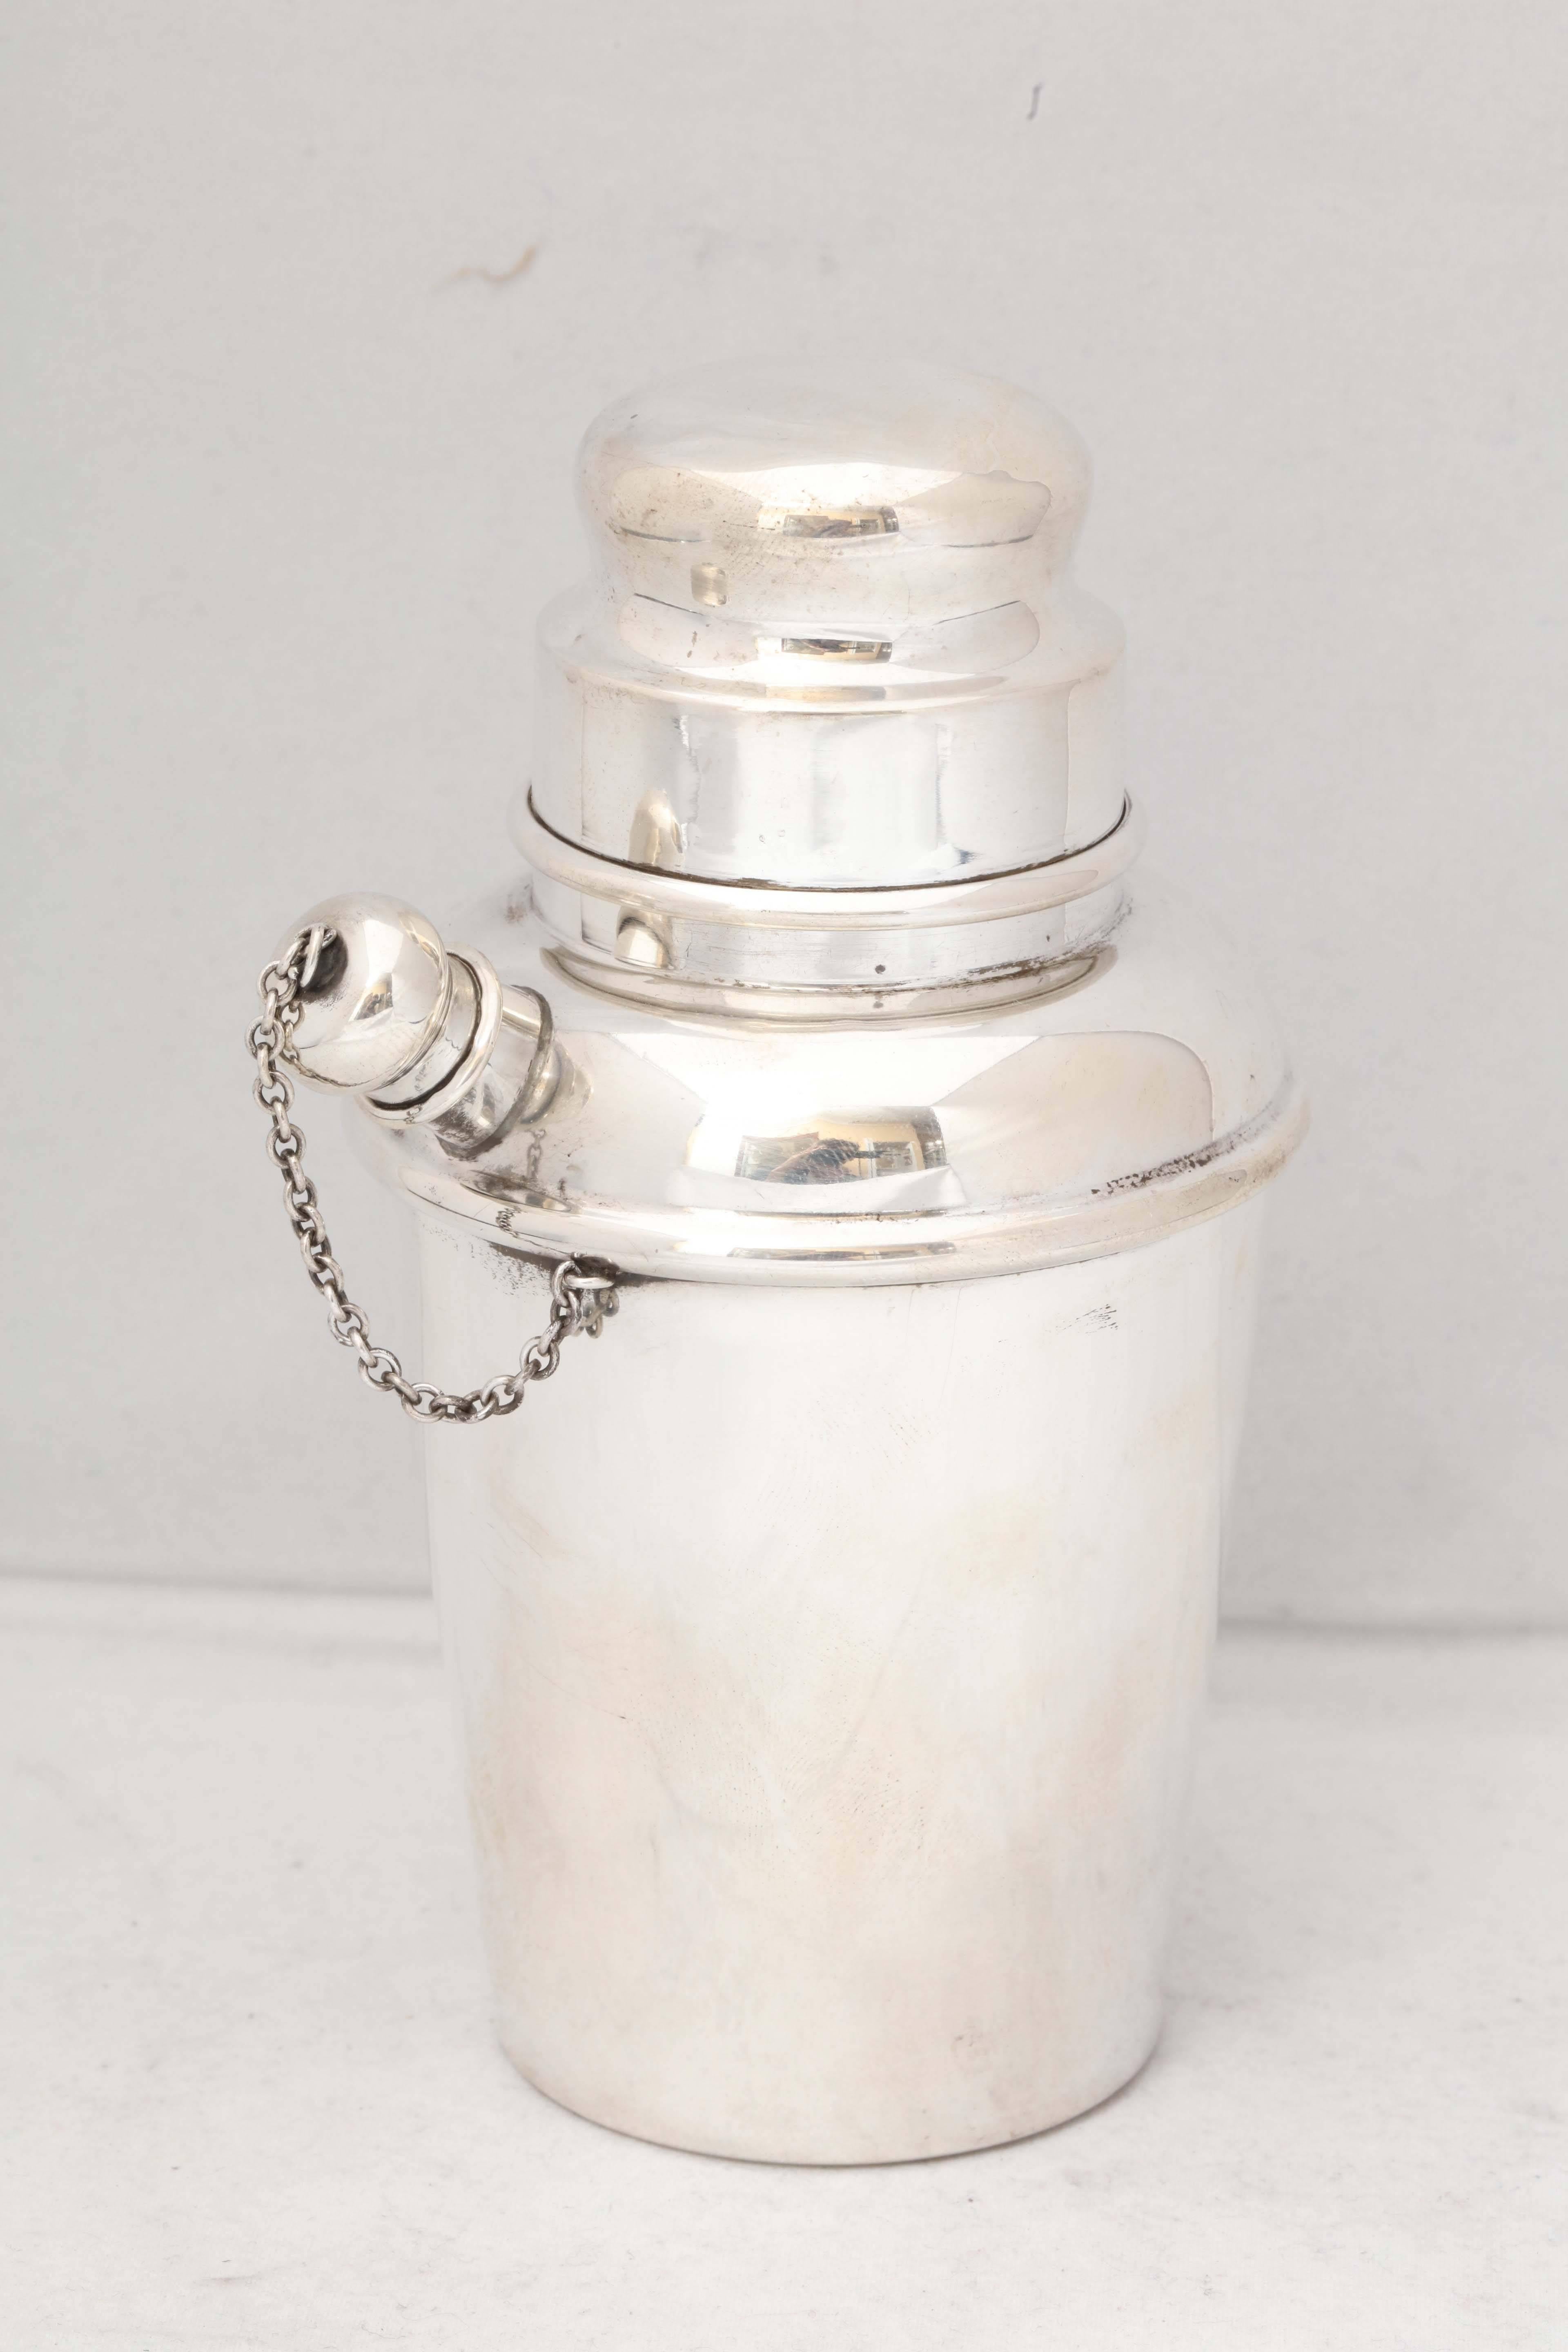 Art Deco style, sterling silver cocktail shaker, Reed & Barton Co., Taunton, Mass., year marked for 1949. Measures: 6